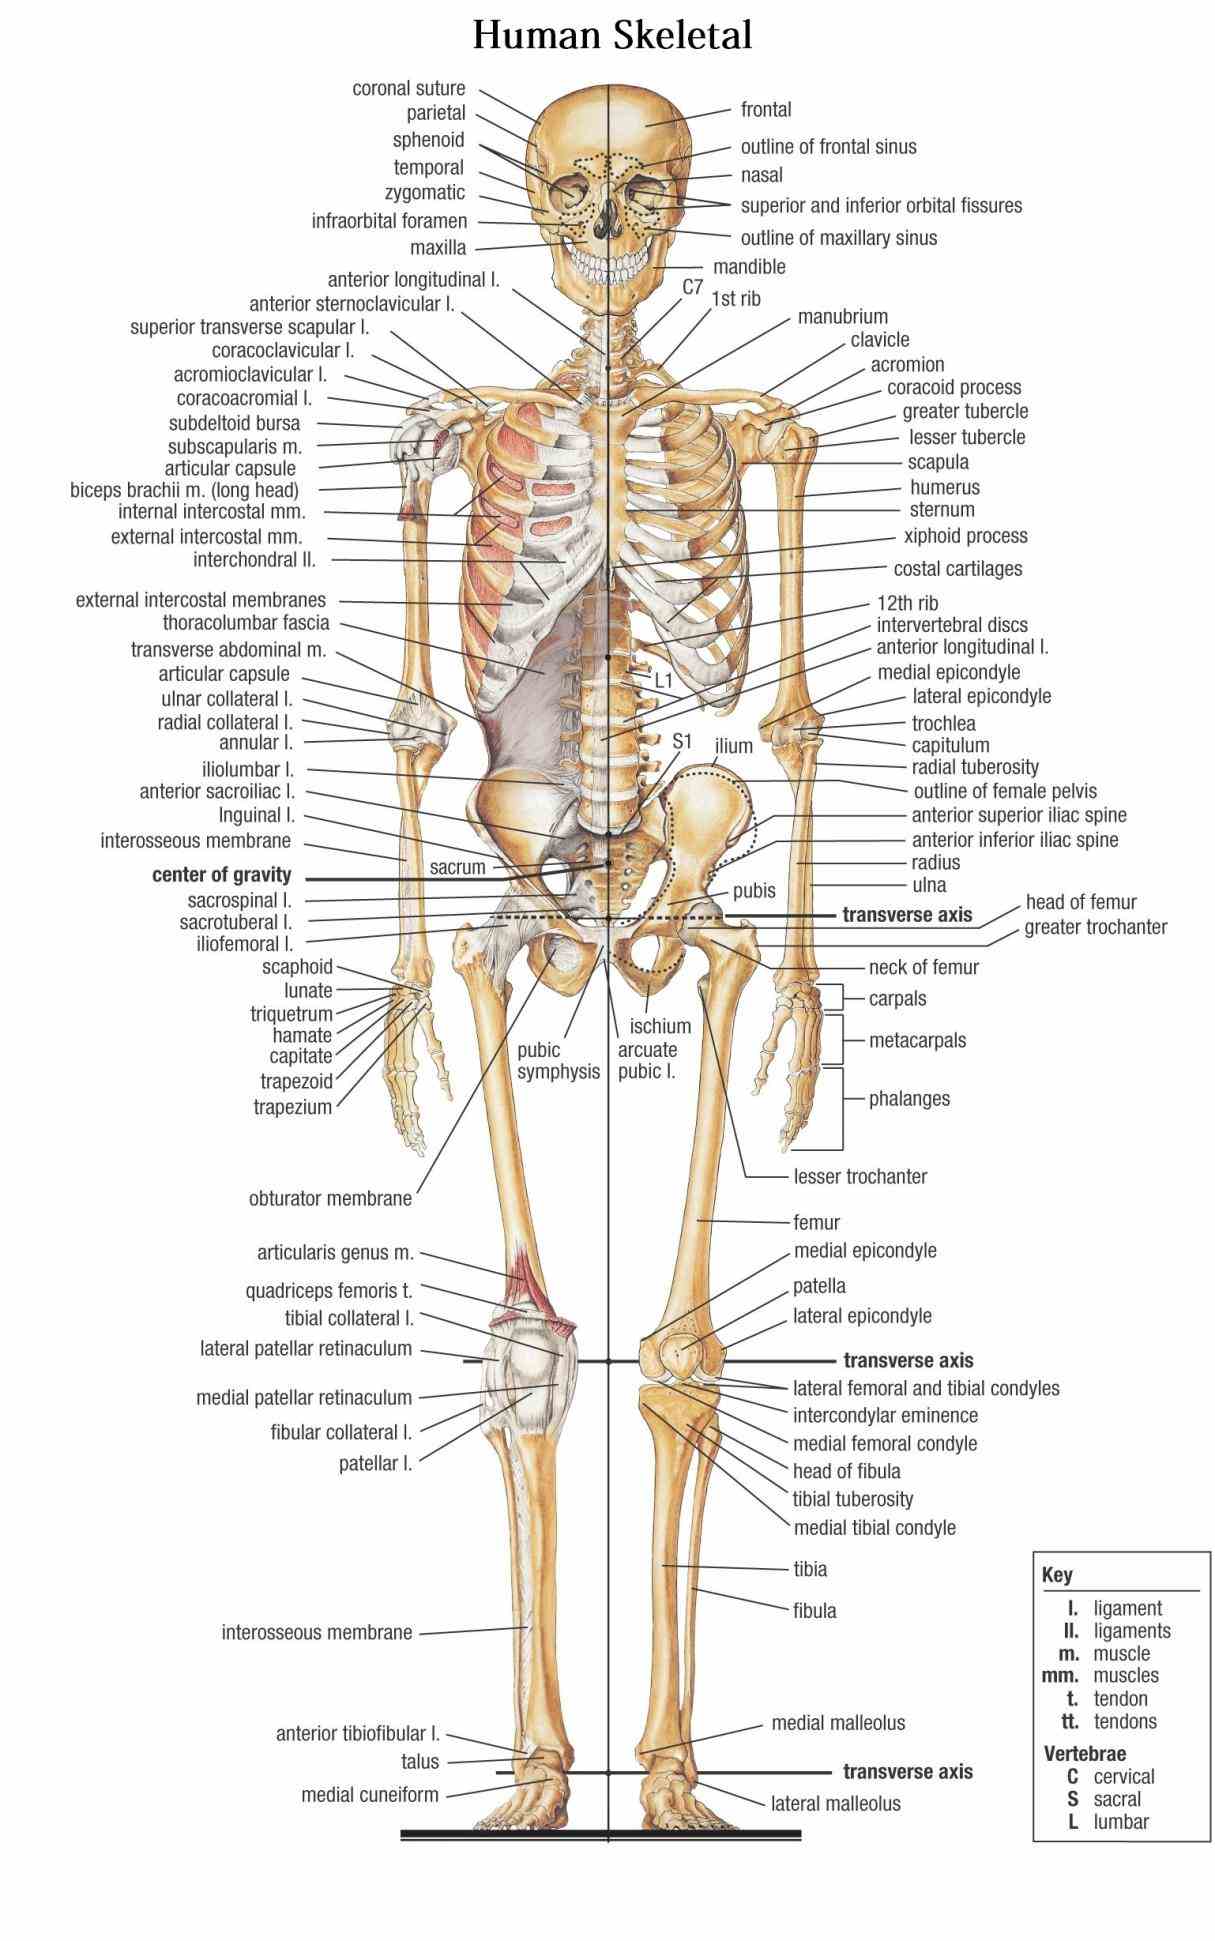 – extensive anatomy images and detailed descriptions allow appendicular skeleton is made up of bones in folowing regions de